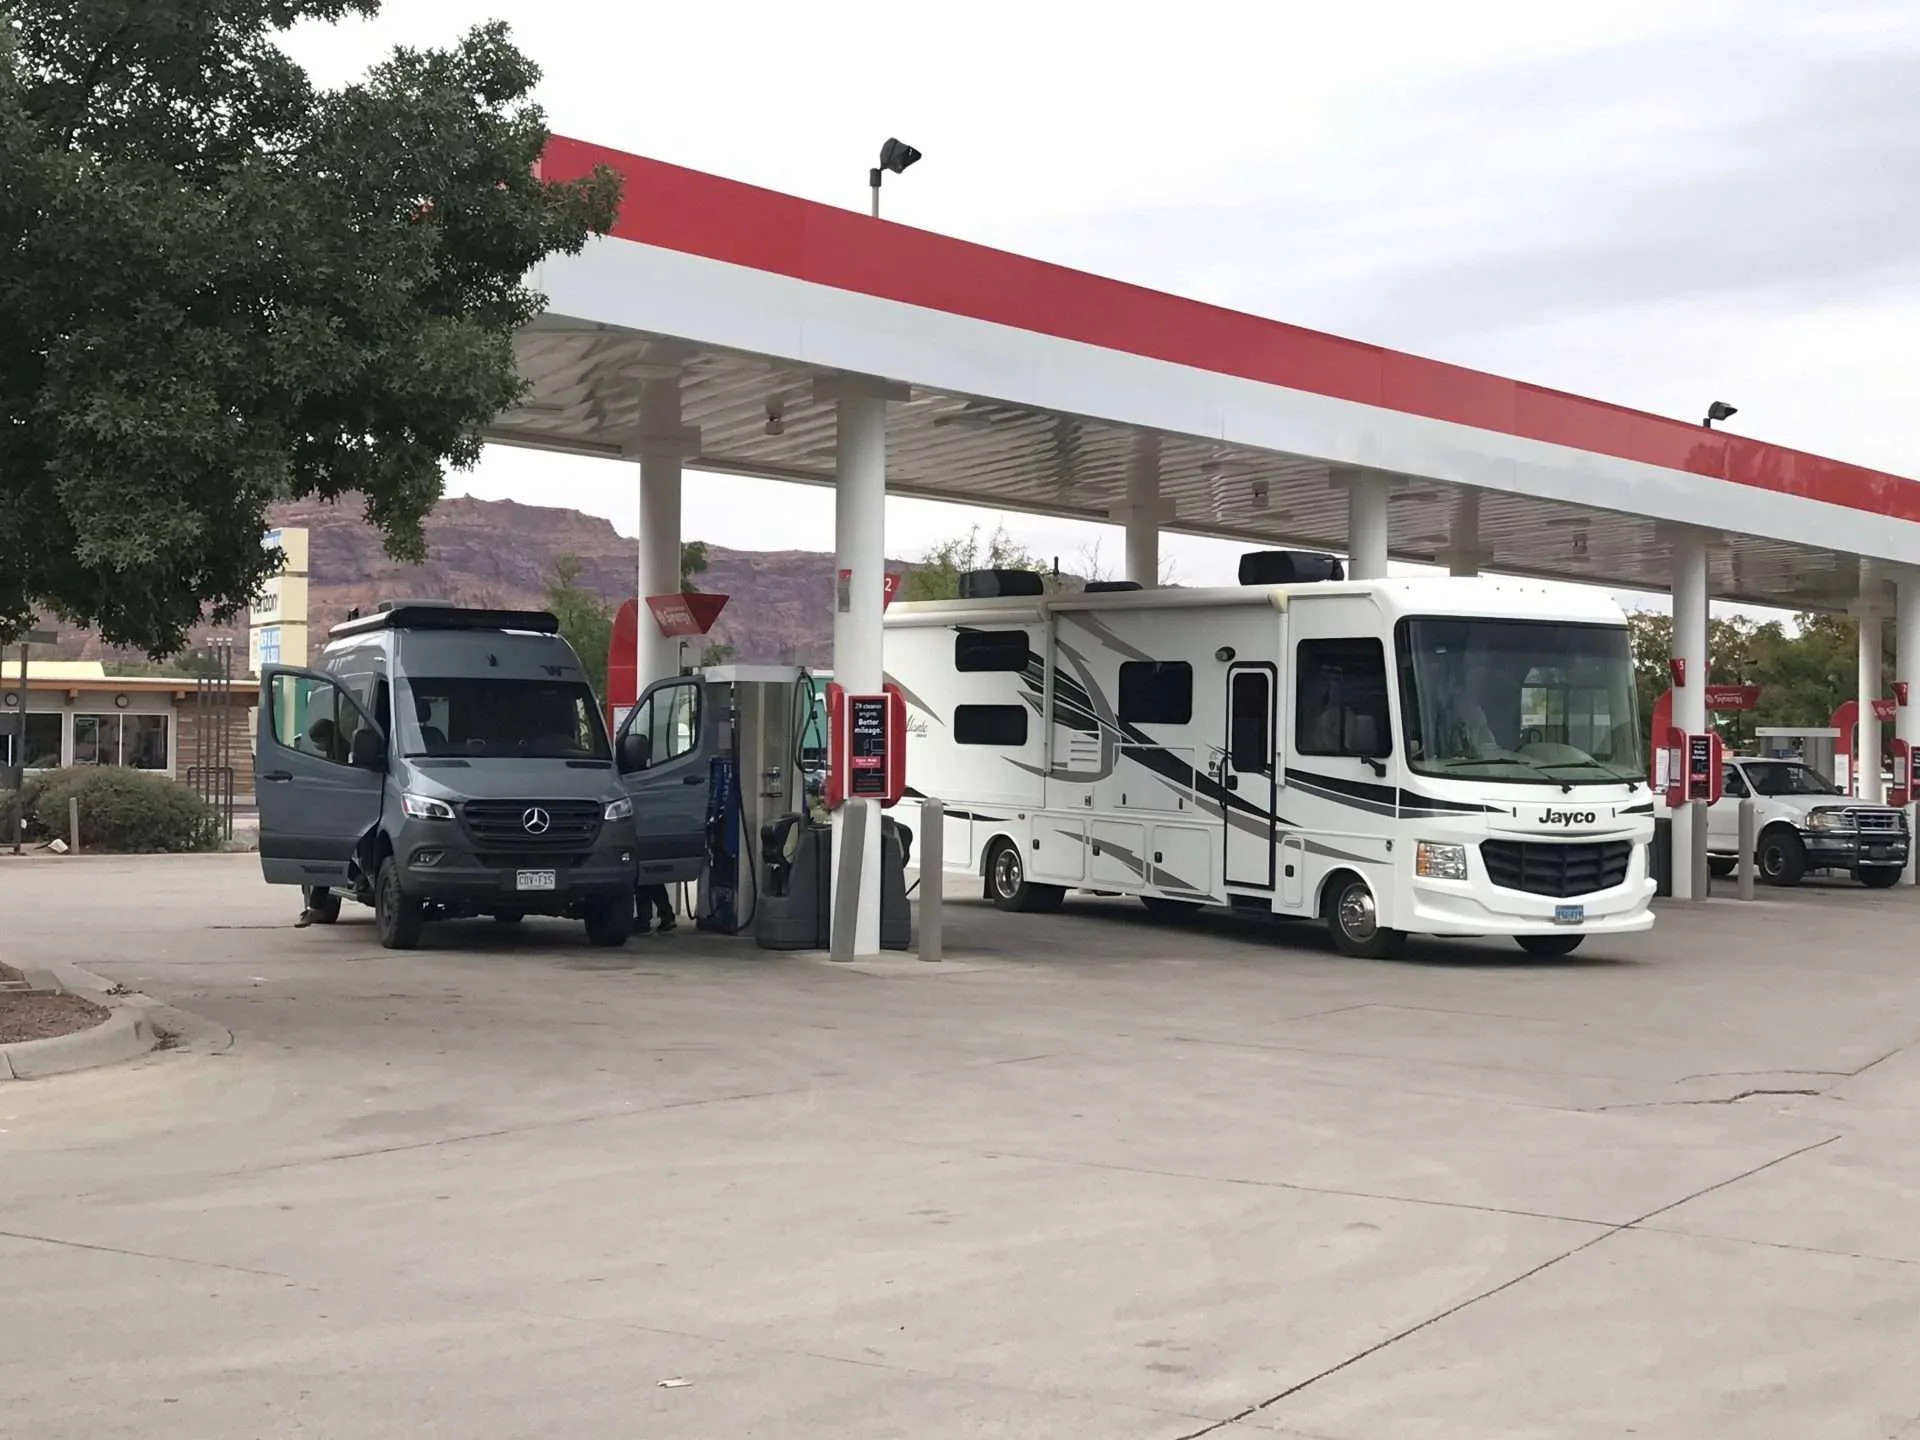 Different RVs refilling at gas station